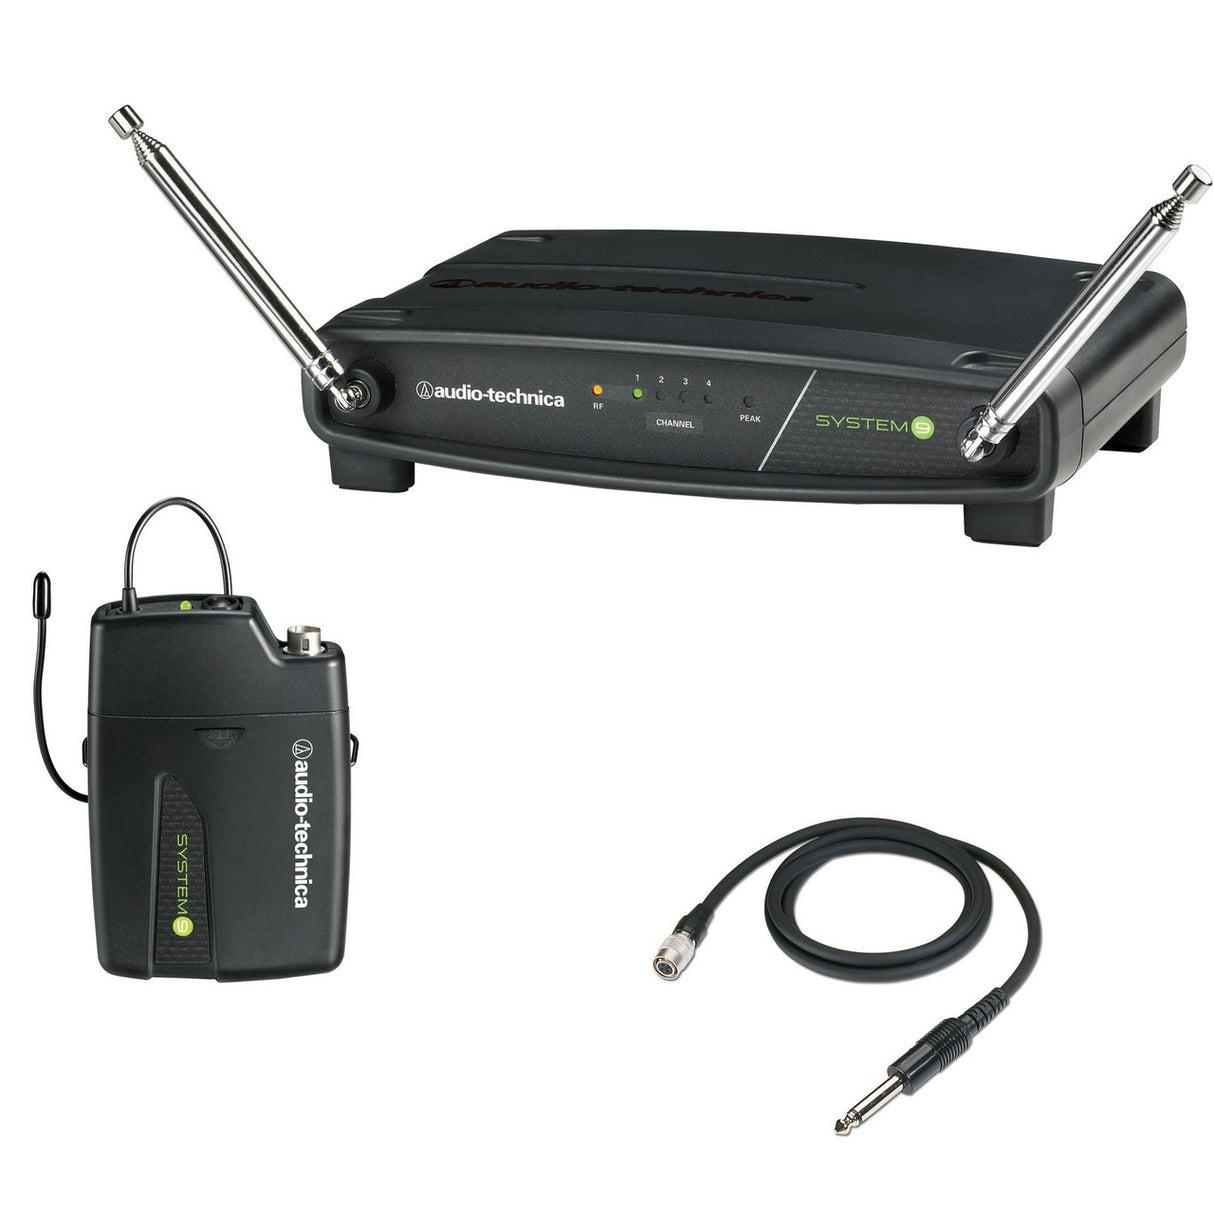 Audio Technica ATW-901a/G | System 9 VHF Wireless System with Guitar Instrument Cable